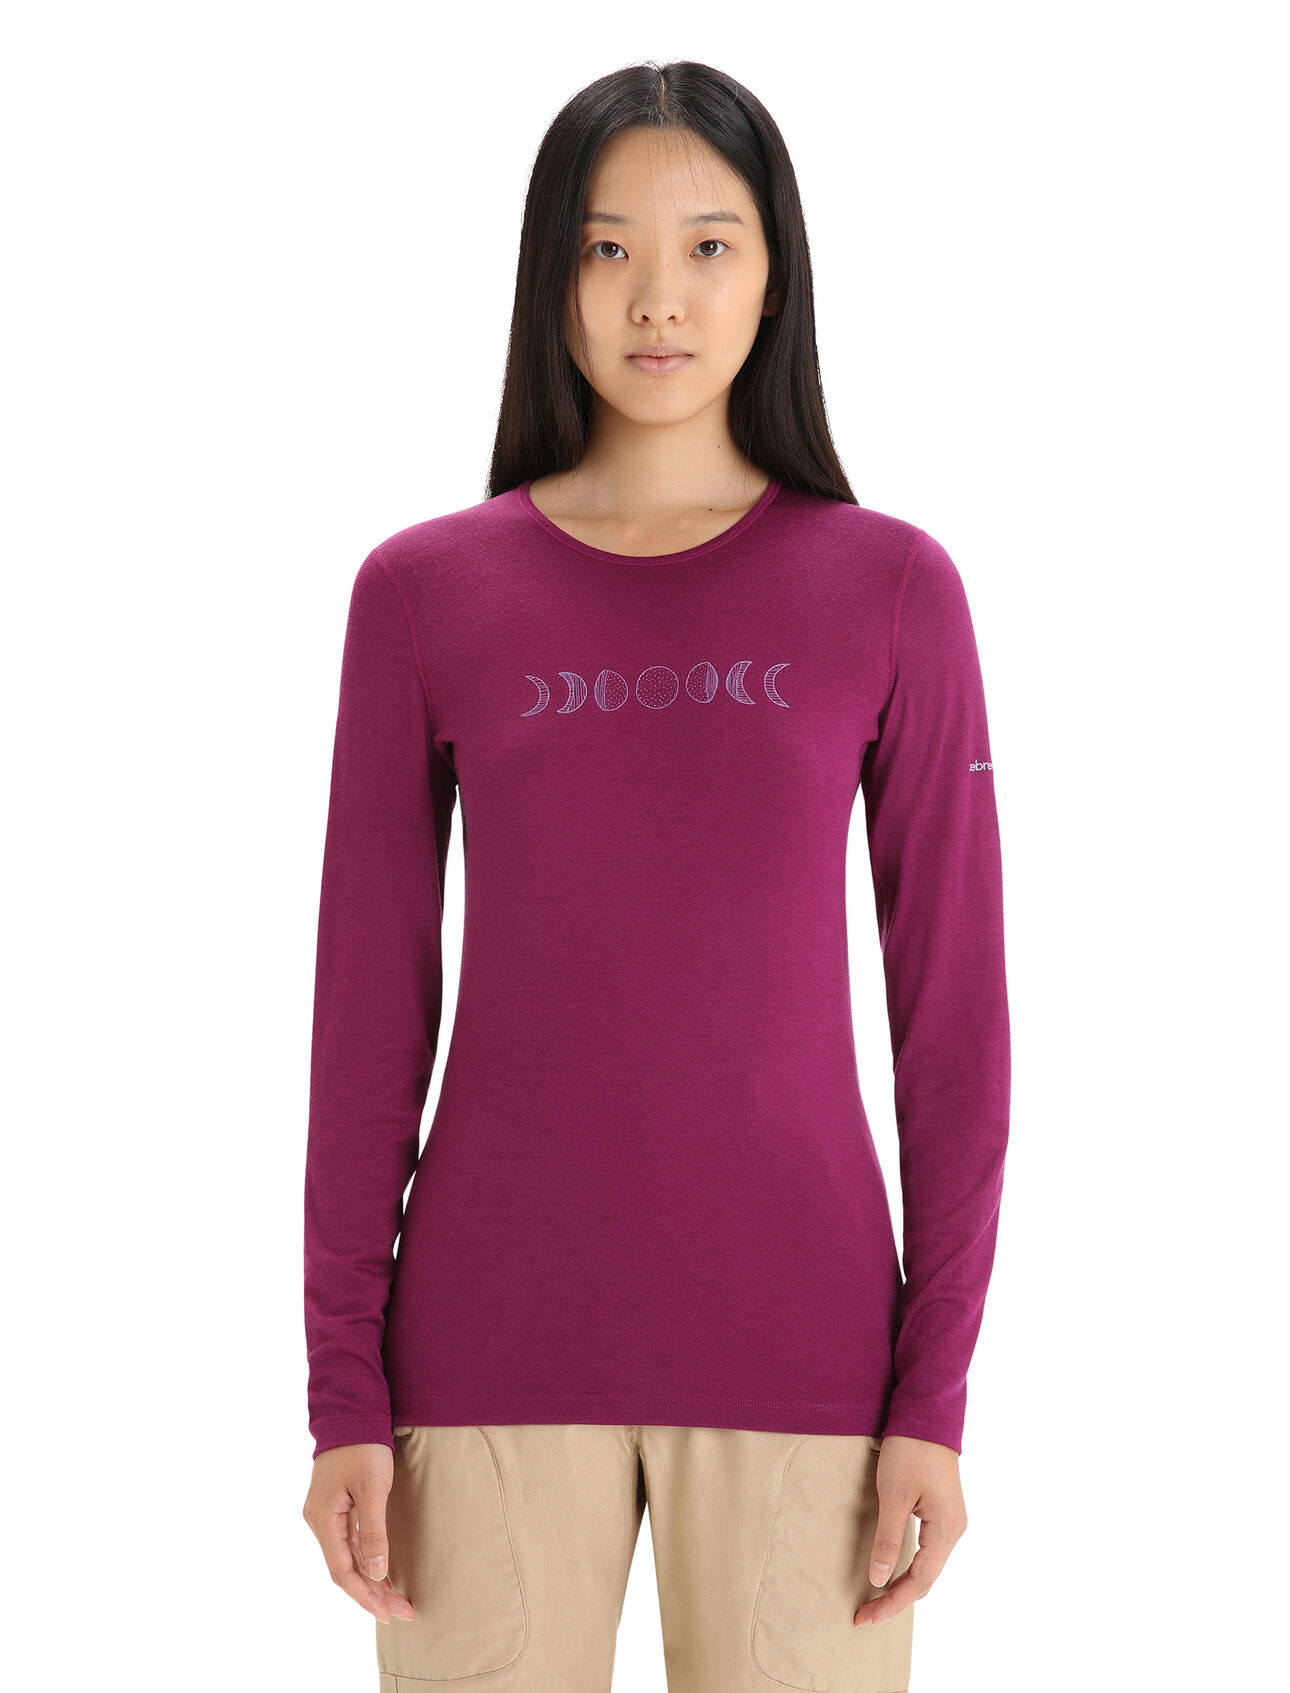 Womens Merino 200 Oasis Long Sleeve Crewe Thermal Top Moon Phase The benchmark against which all others are judged, the 200 Oasis Long Sleeve Crewe Moon Phase features our most versatile merino jersey fabric for year-round layering performance across any activity. The top's original artwork features a line drawing of the moon's waxing and waning.